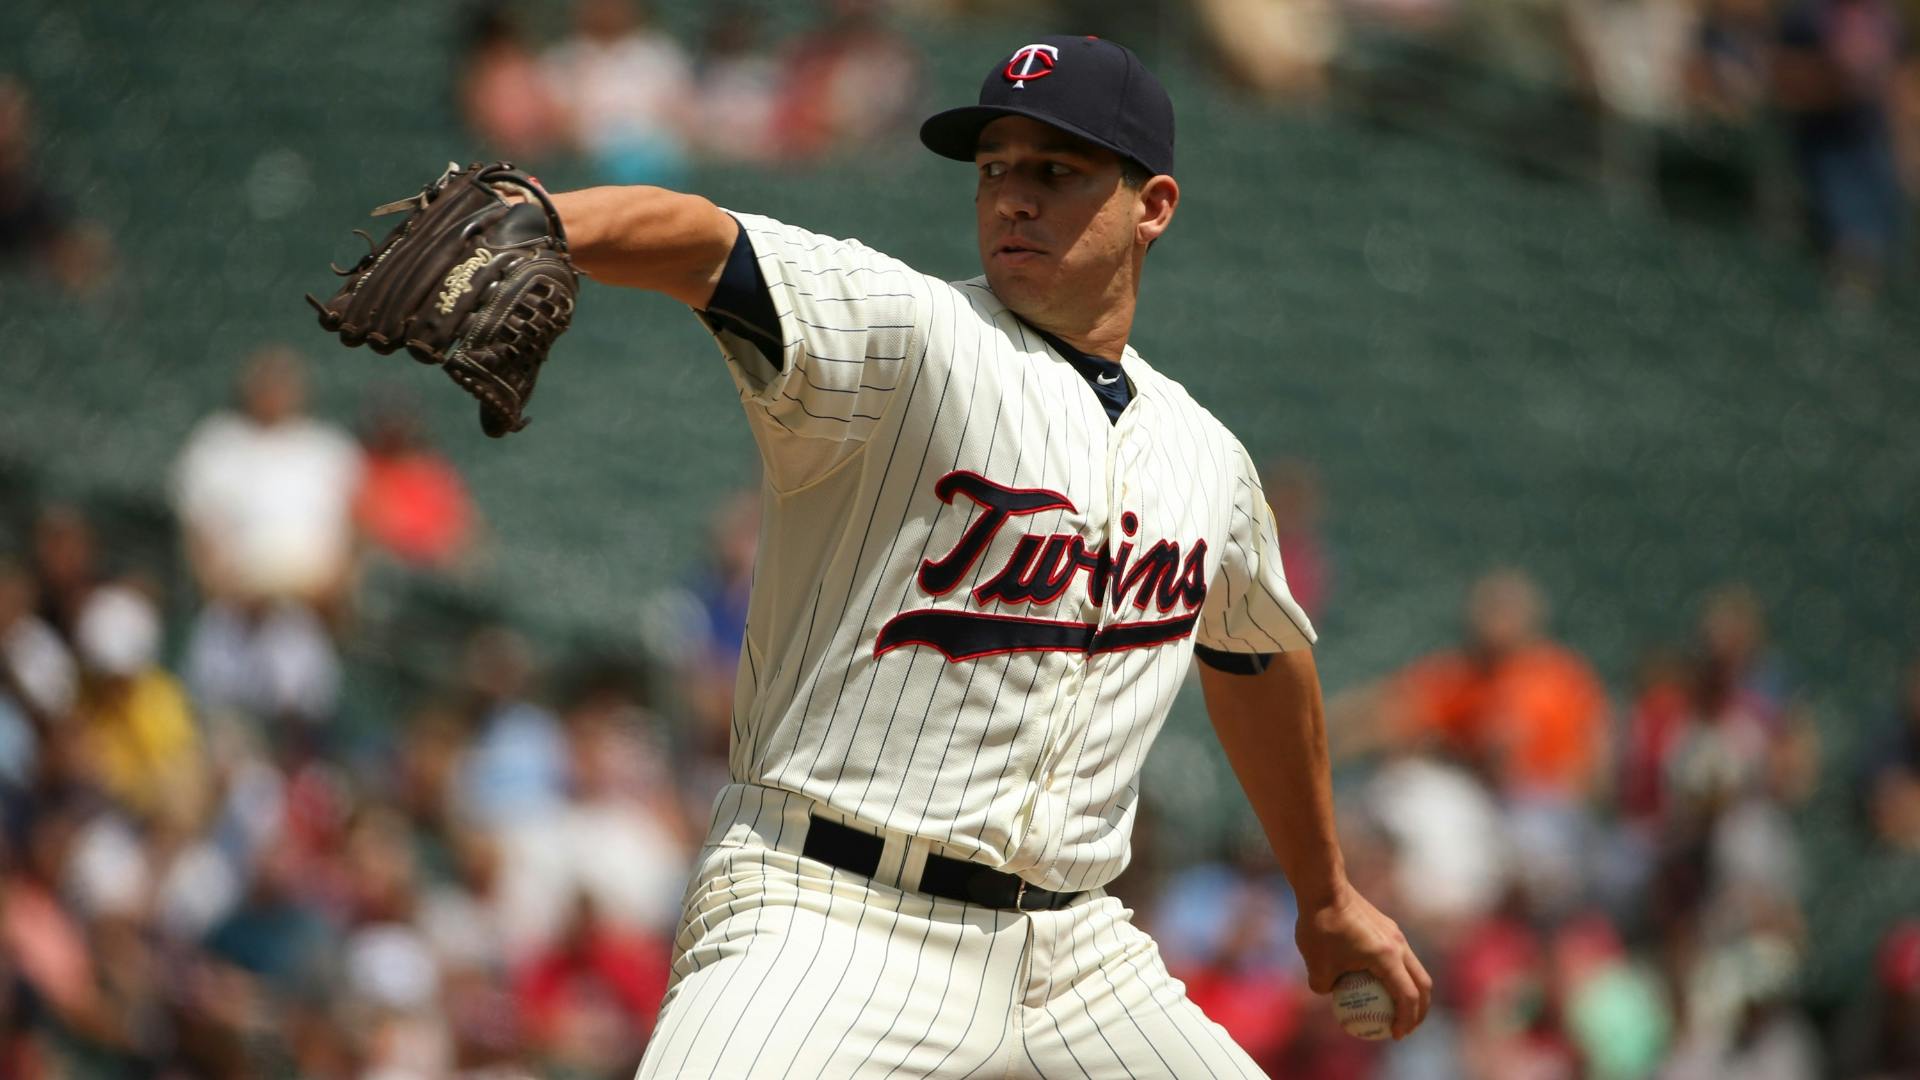 Twins lefthander Tommy Milone says he kept hitters off balance by mixing up his pitches during Wednesday's win over Baltimore.